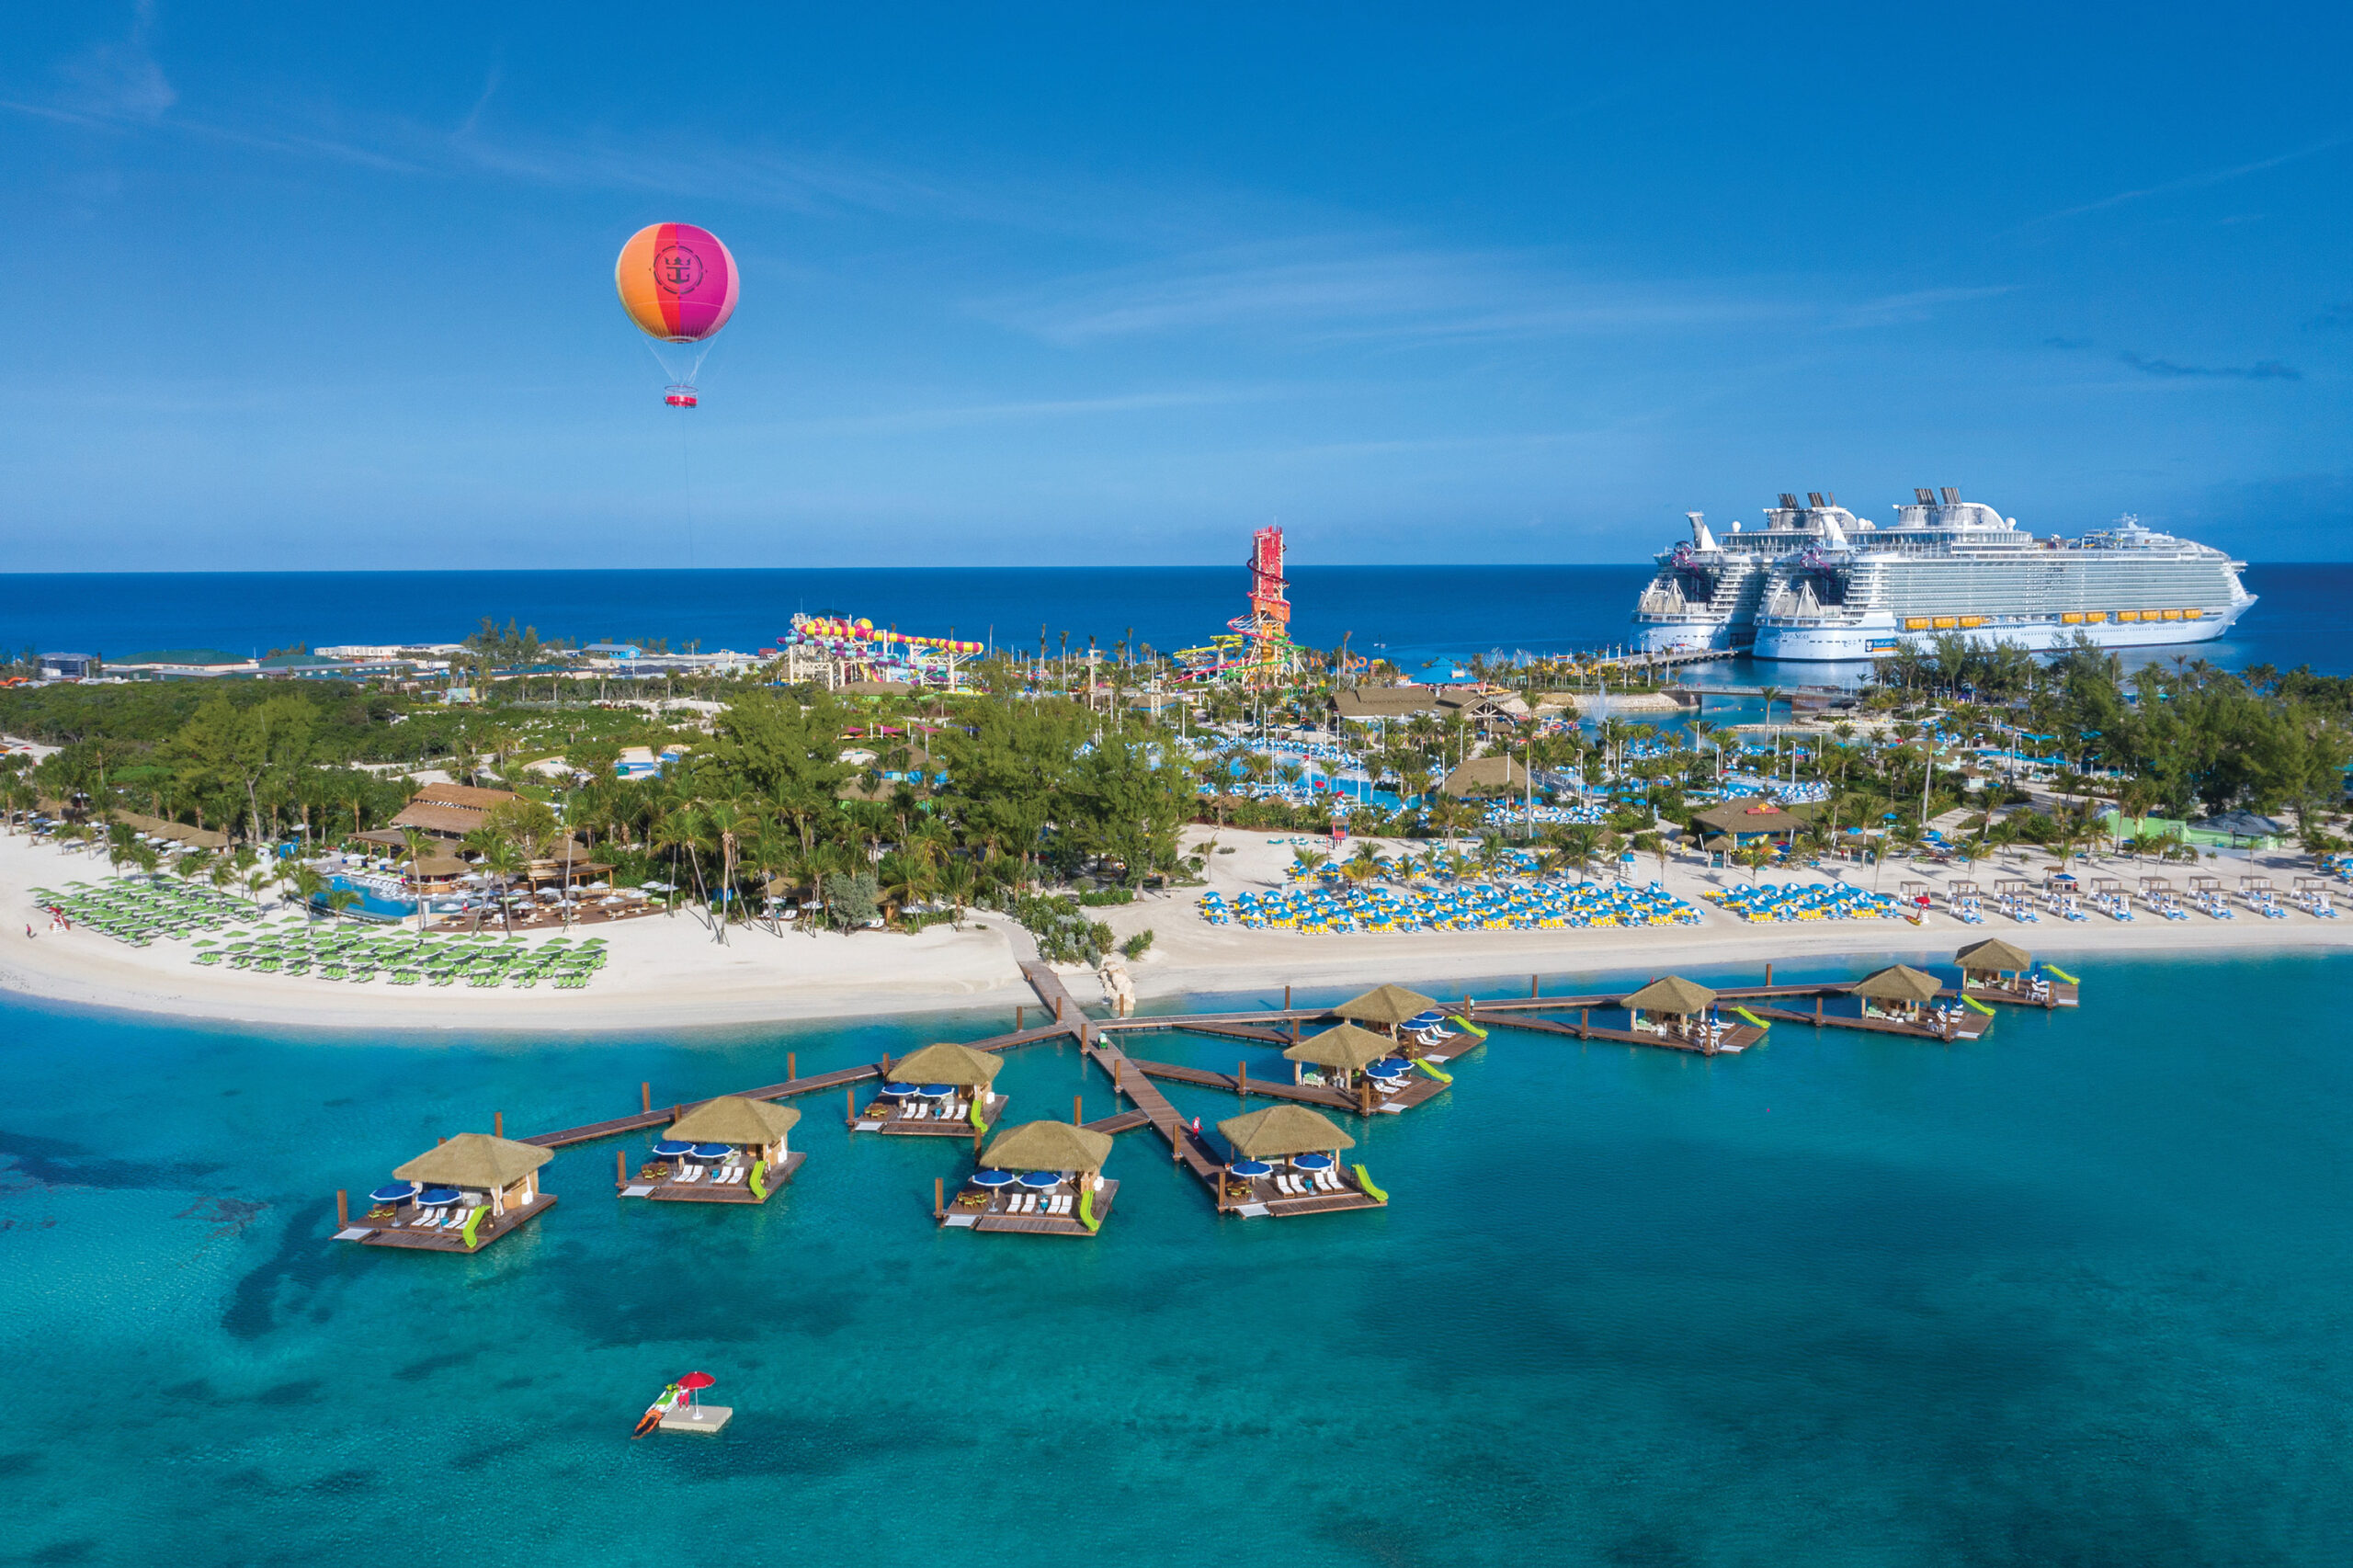 Aluminum floating docks with overwater cabanas at CocoCay resort in the Caribbean